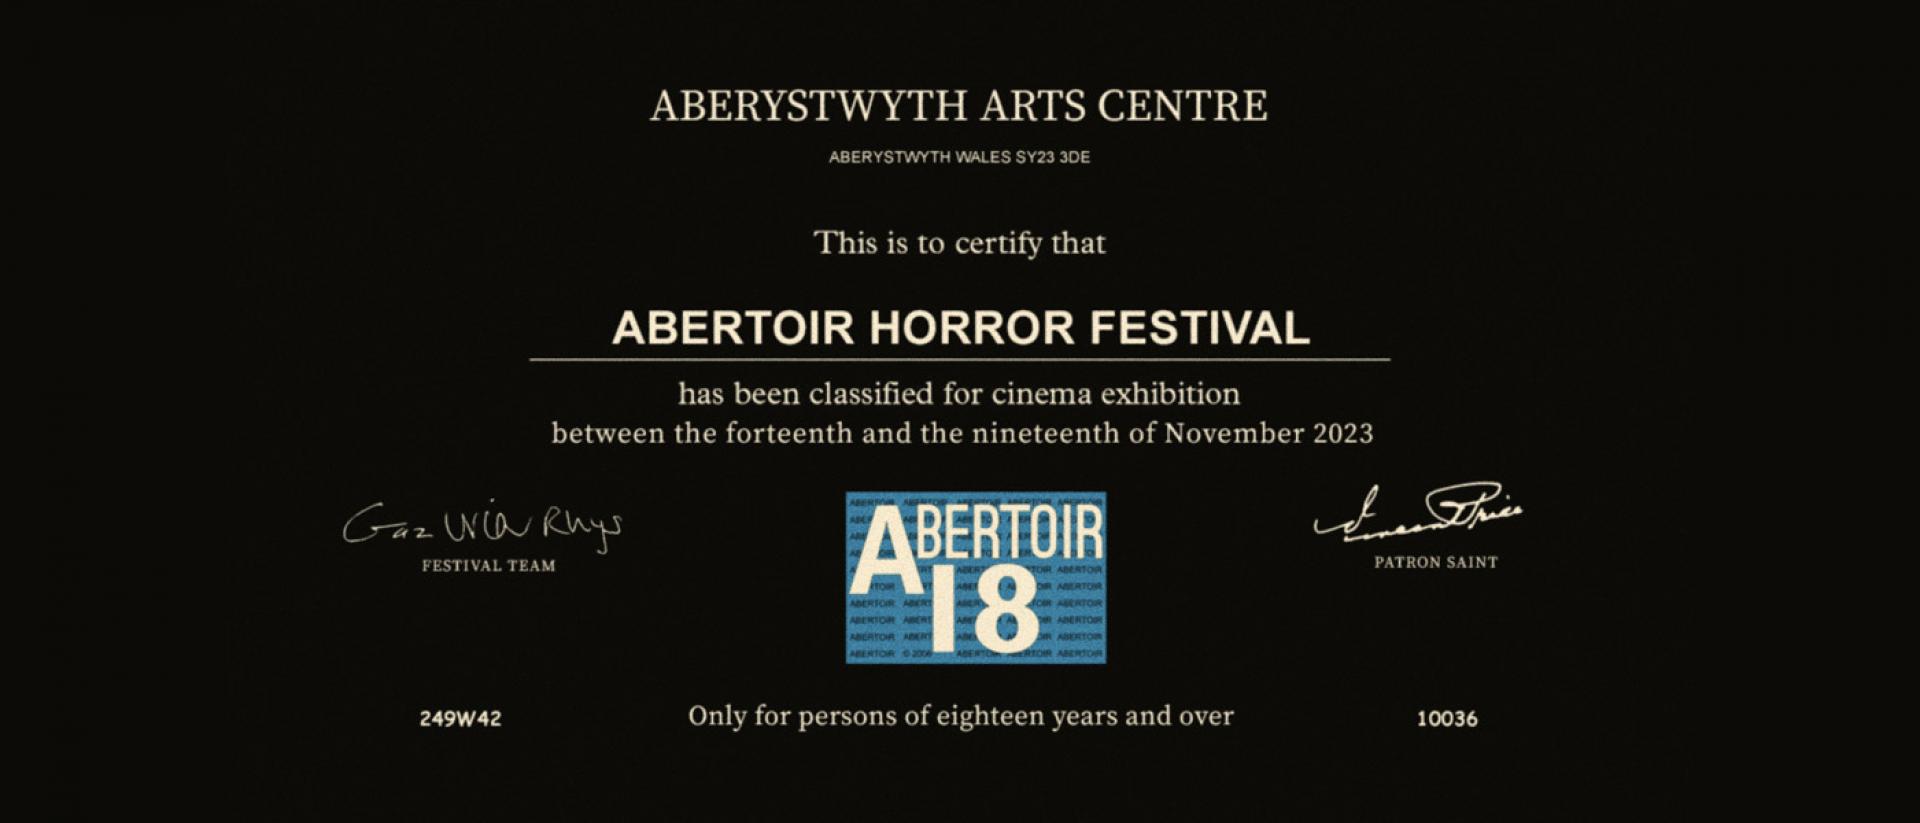 a black screen with white text that reads: Aberystwyth Arts Centre. This is to certify that ABERTOIR HORROR FESTIVAL has been classified for cinema exhibition between the fourteenth and nineteenth of November 2023.